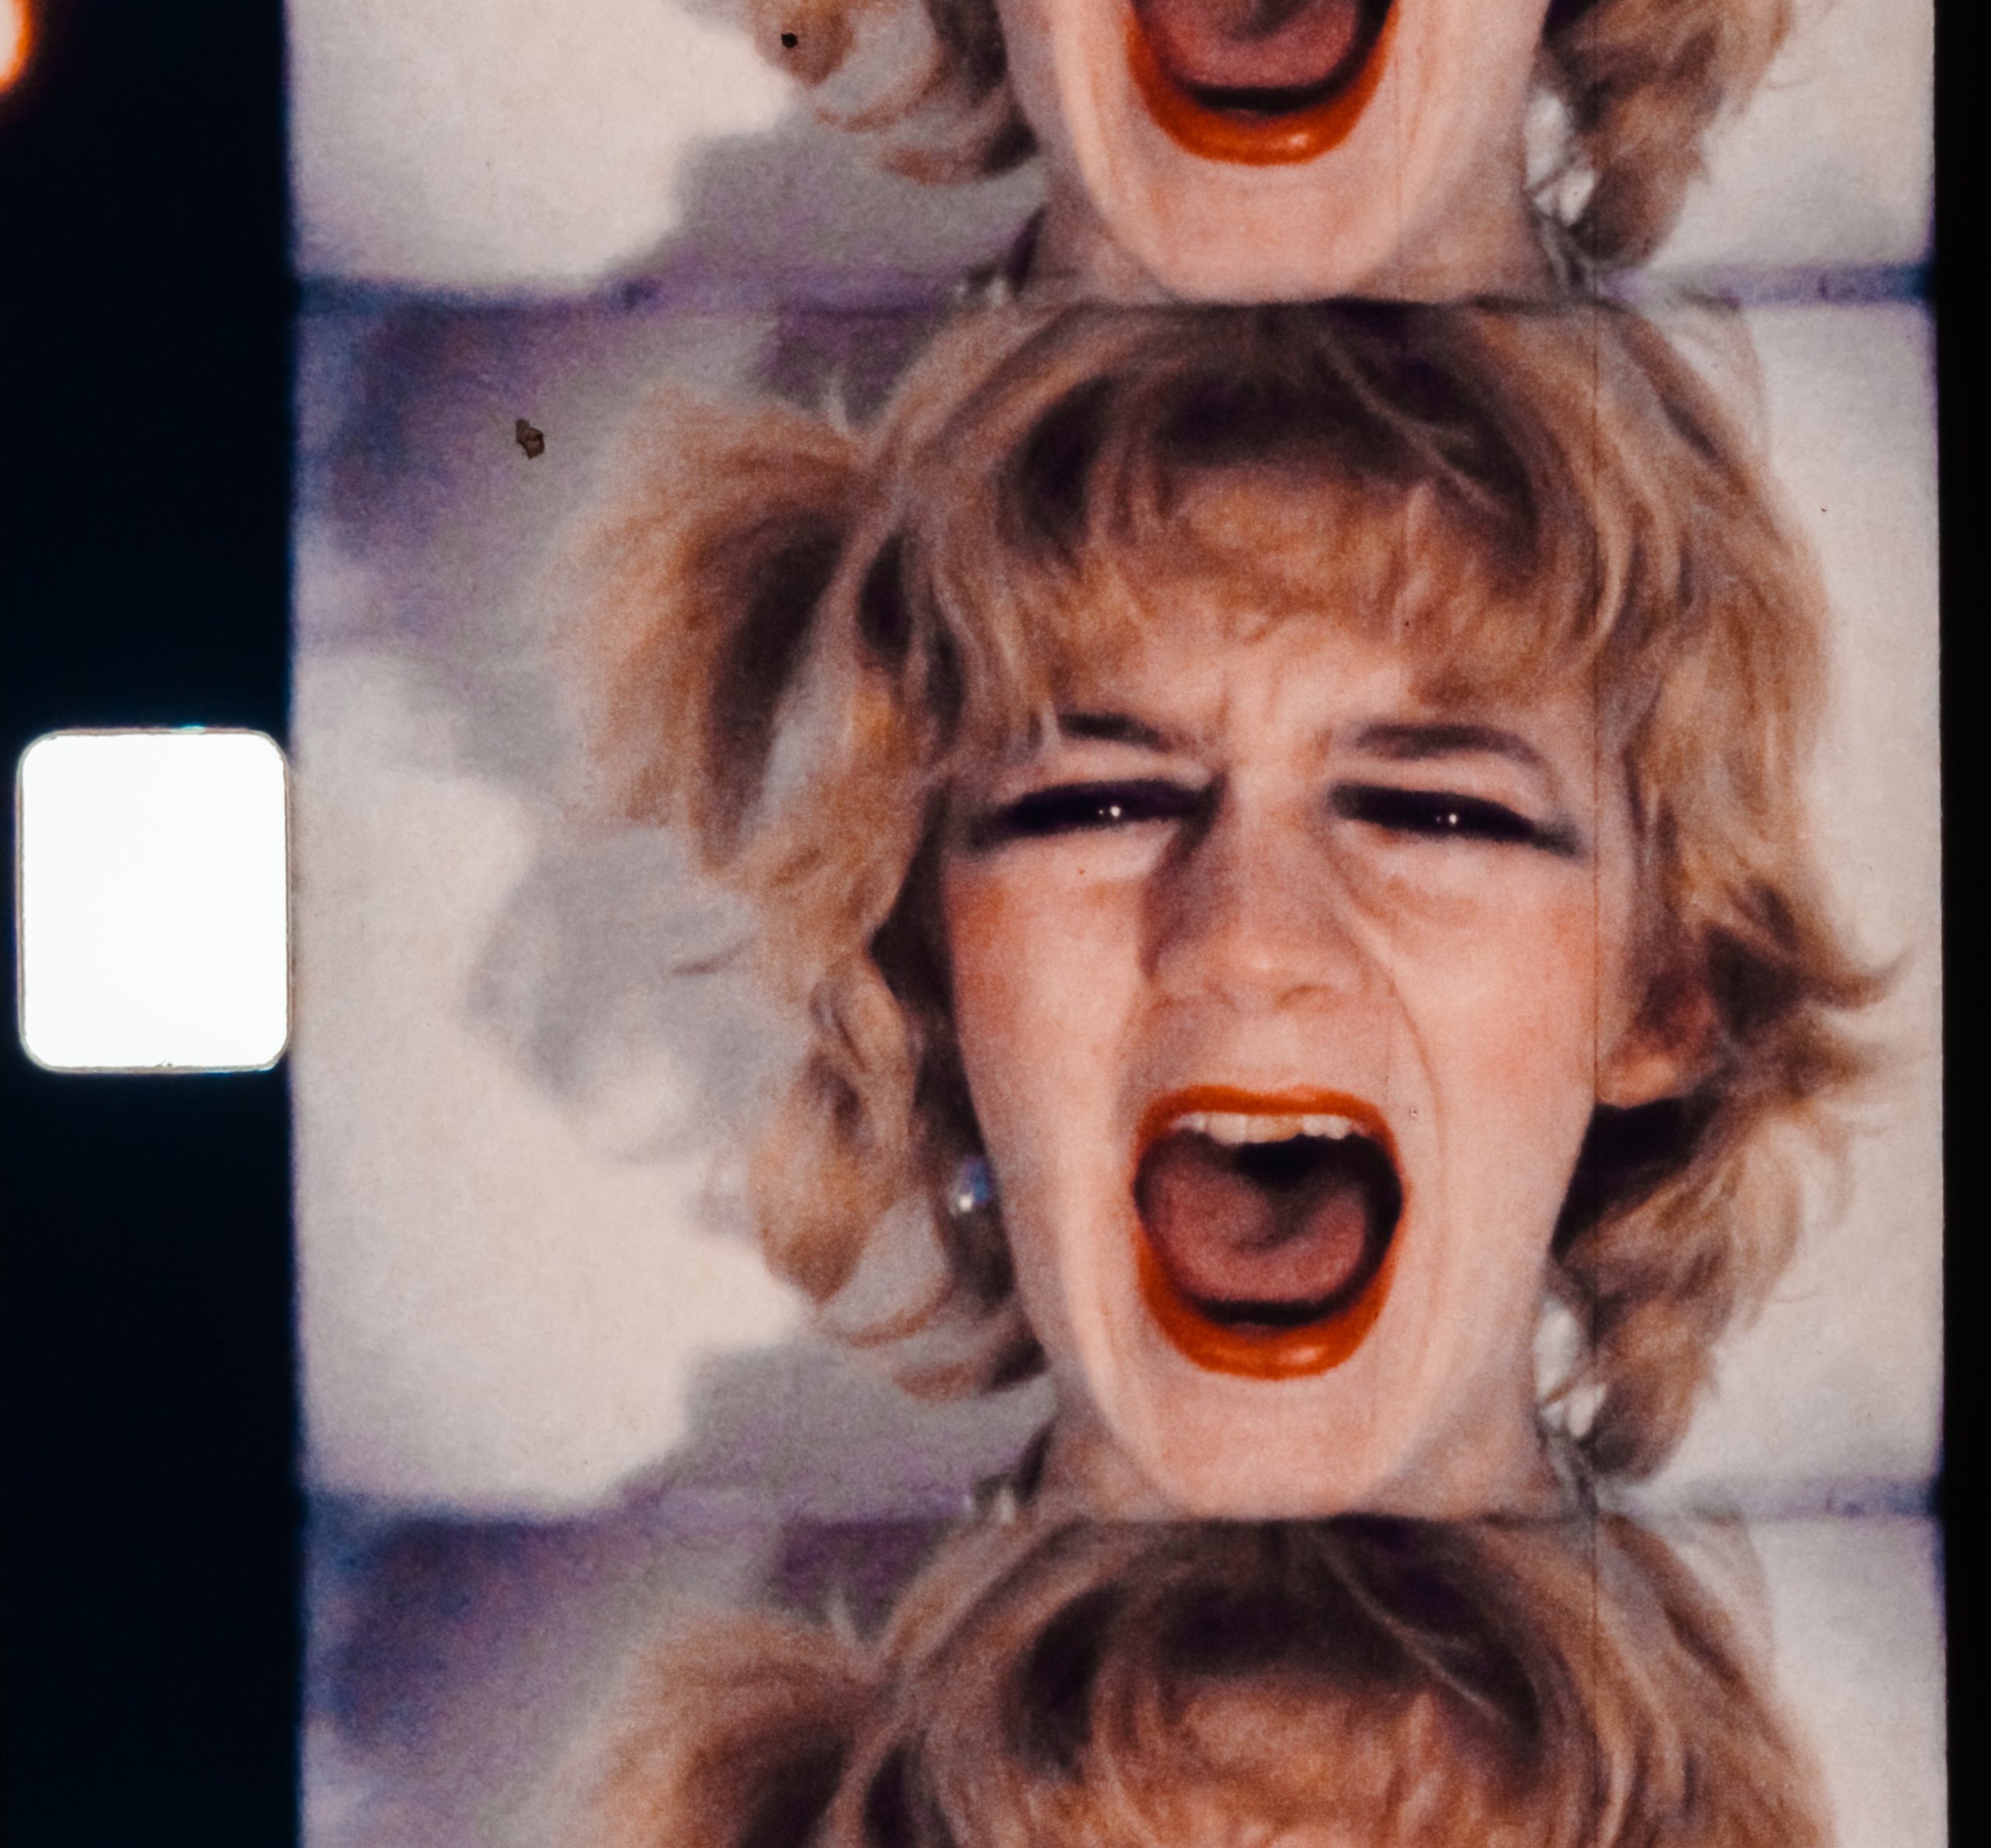 film still showing a woman with blonde hair and red lipstick, screaming